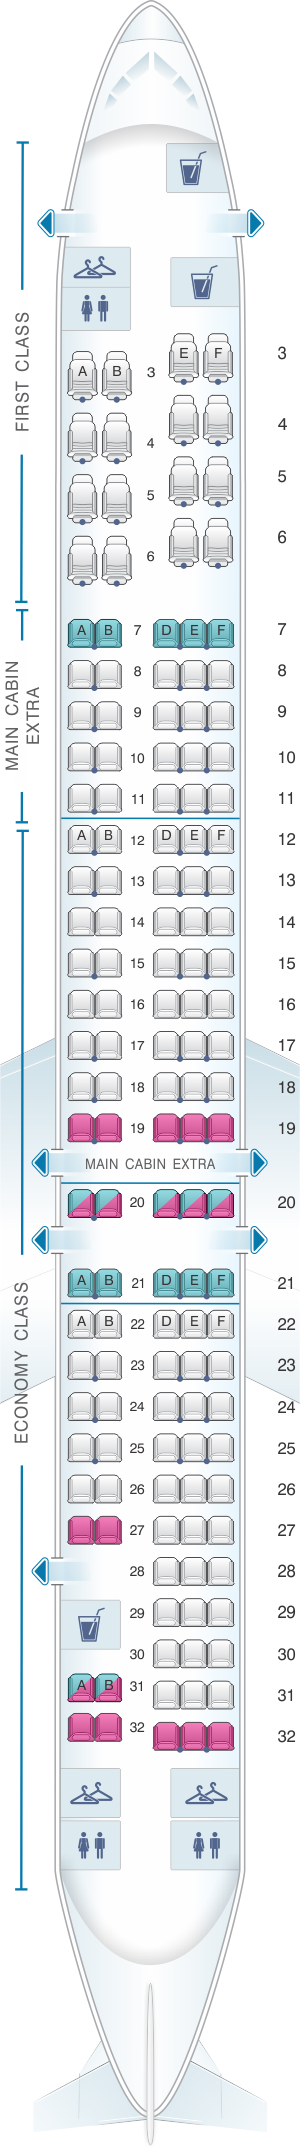 Delta Boeing Douglas Md 80 Seating Chart